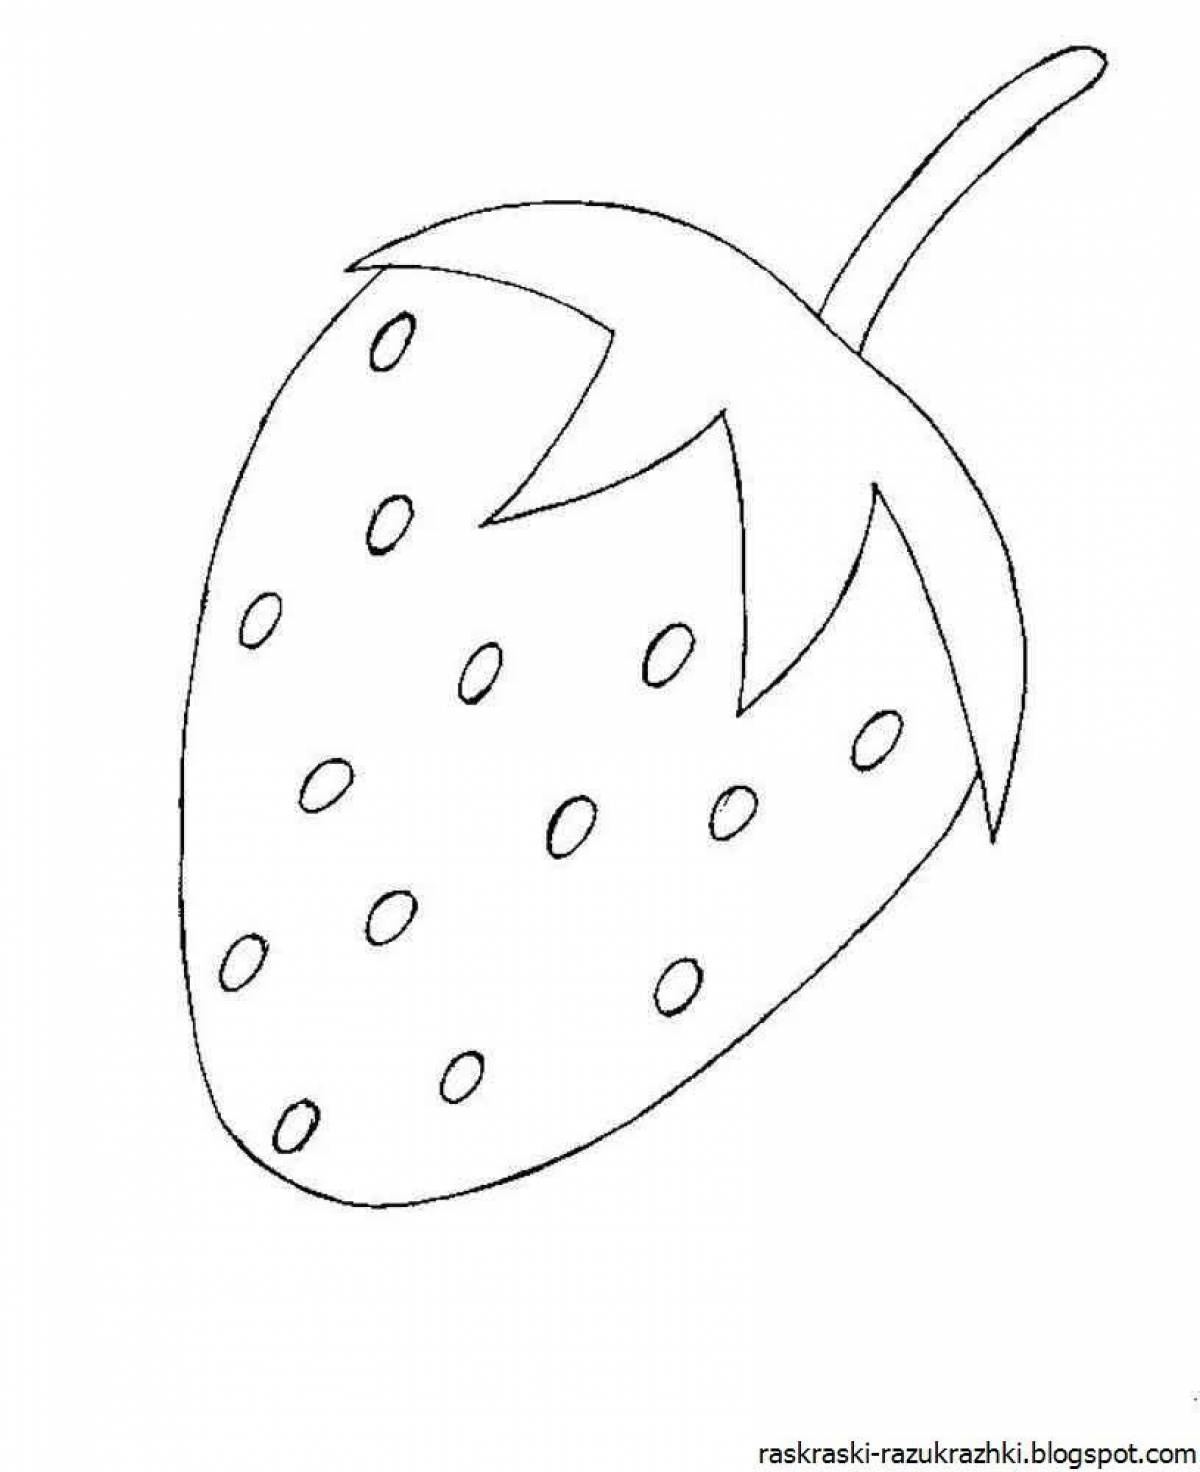 Interesting coloring pages with fruits for children 3-4 years old